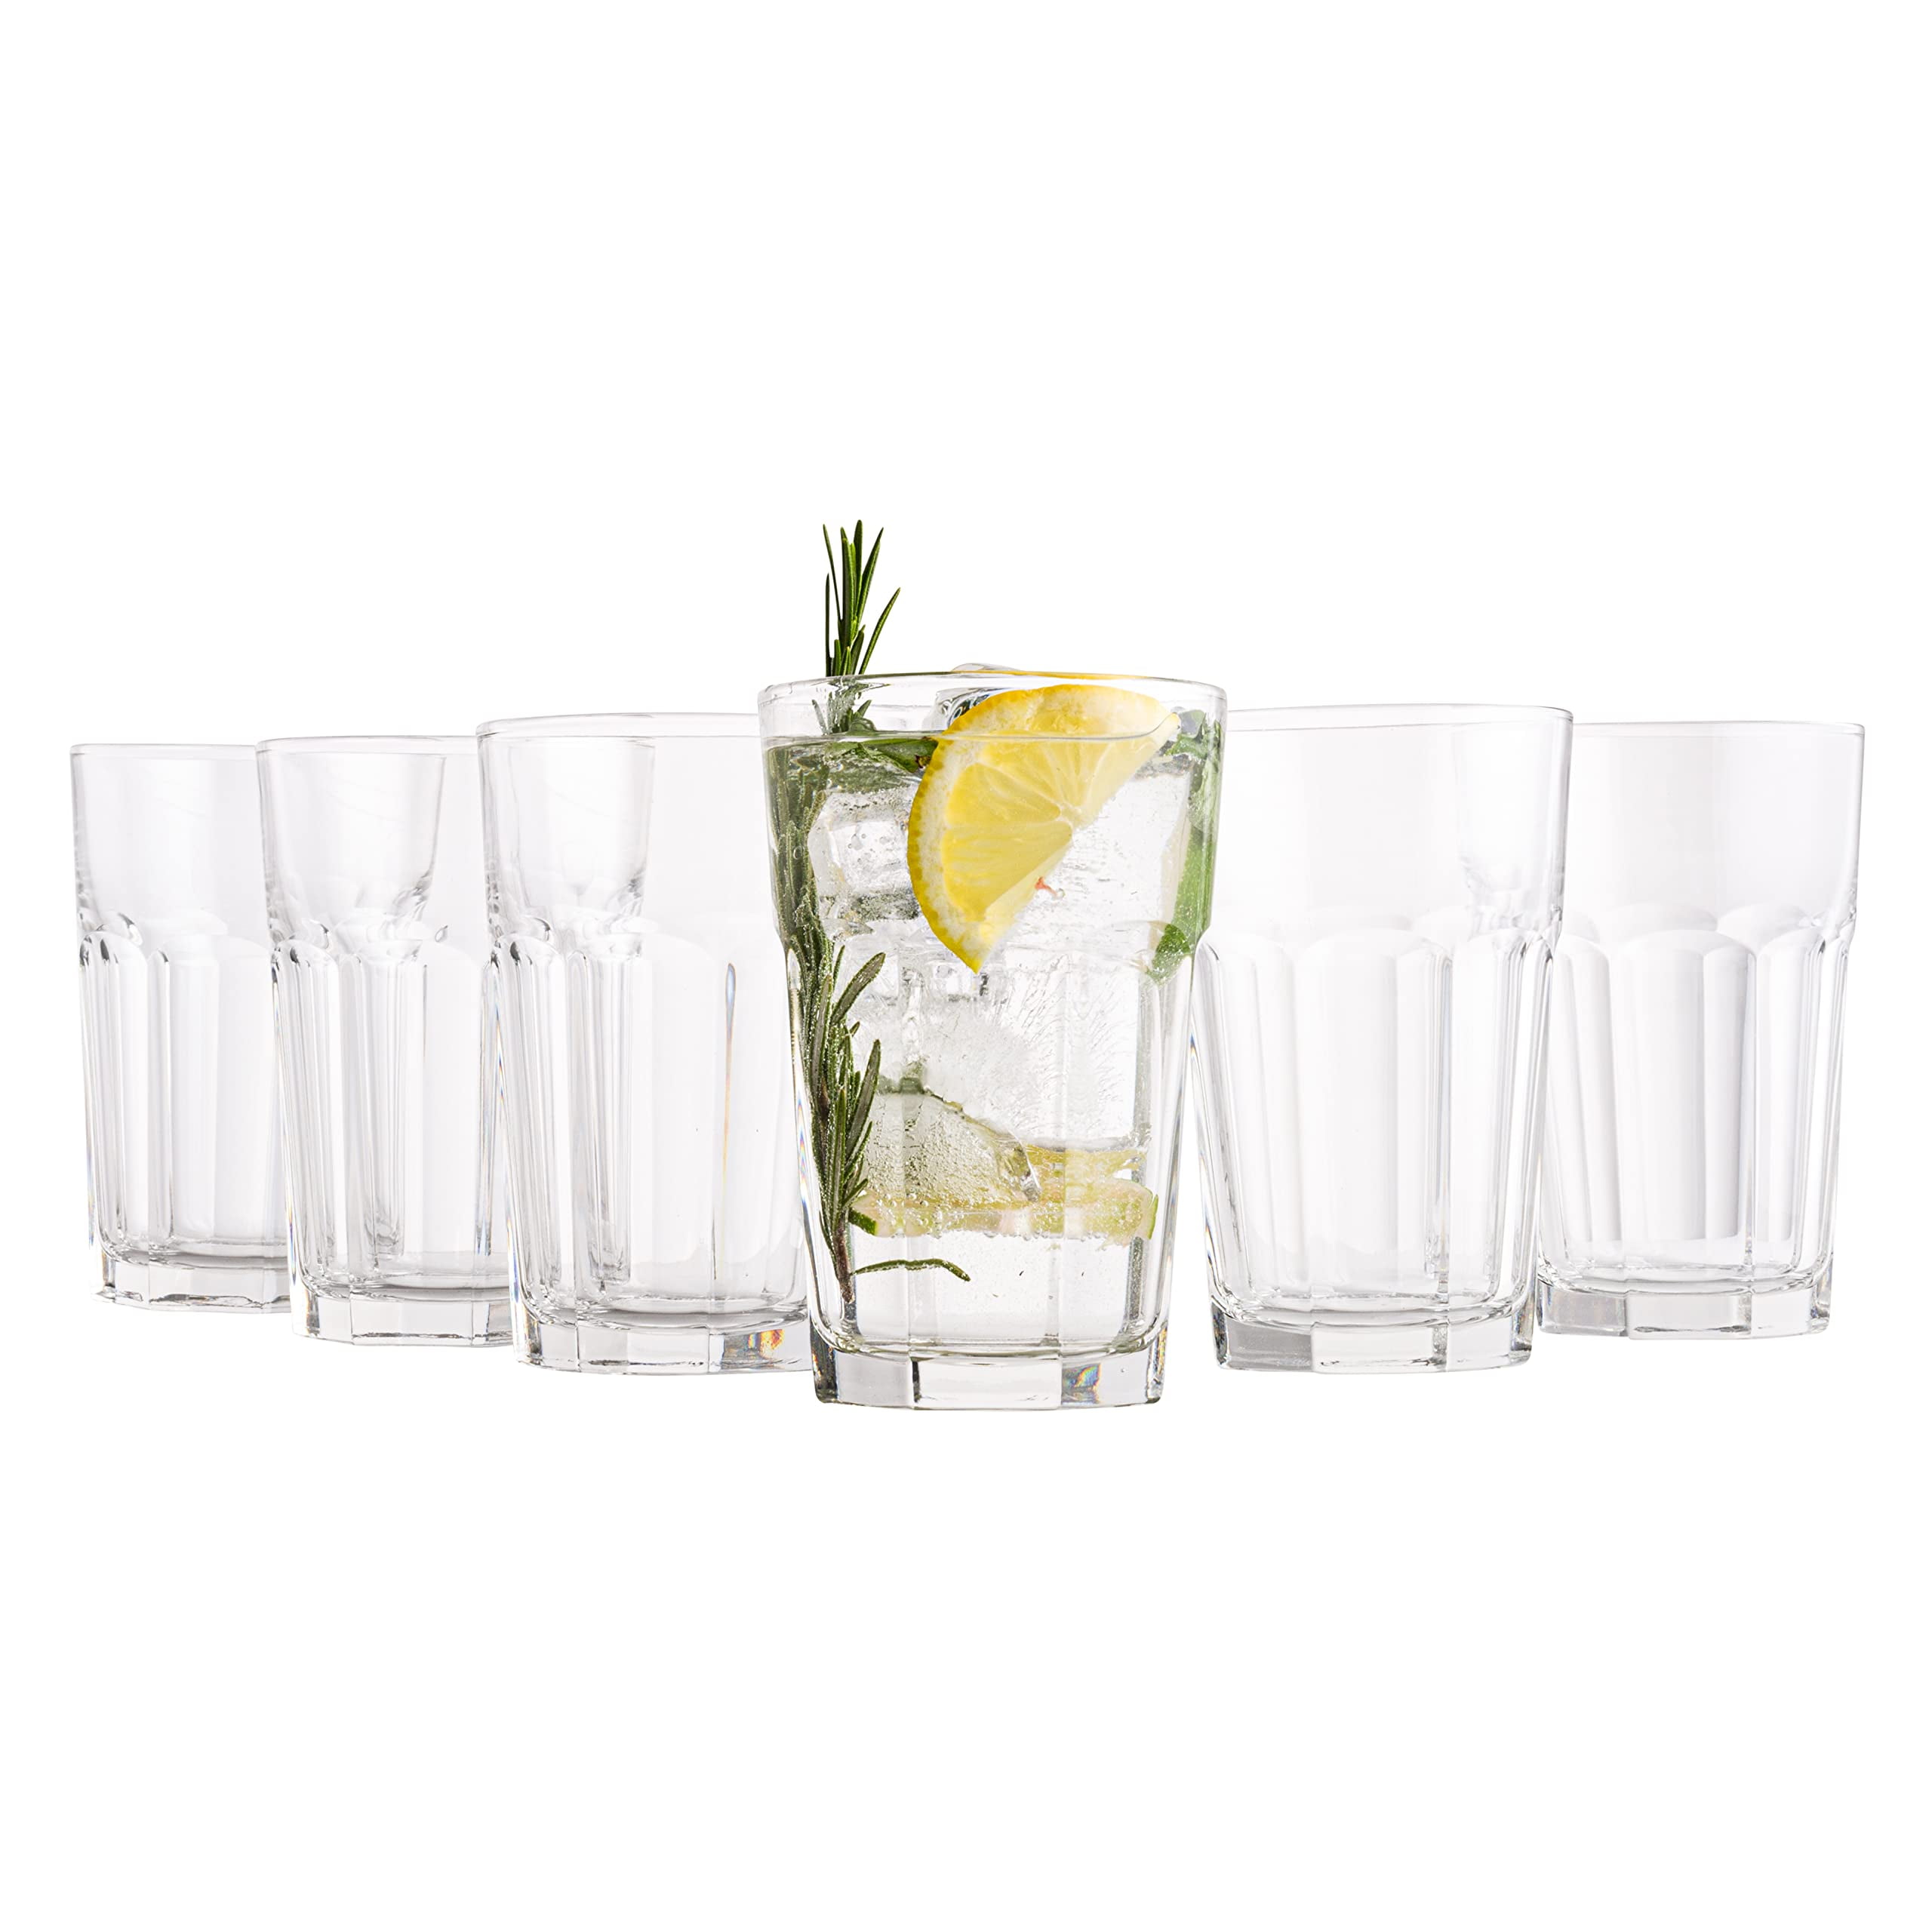 home essentials Juice Glasses Set Of 4 Water Tumbler Glasses Cups 7 oz Uses  for Juice, Water, Cockta…See more home essentials Juice Glasses Set Of 4